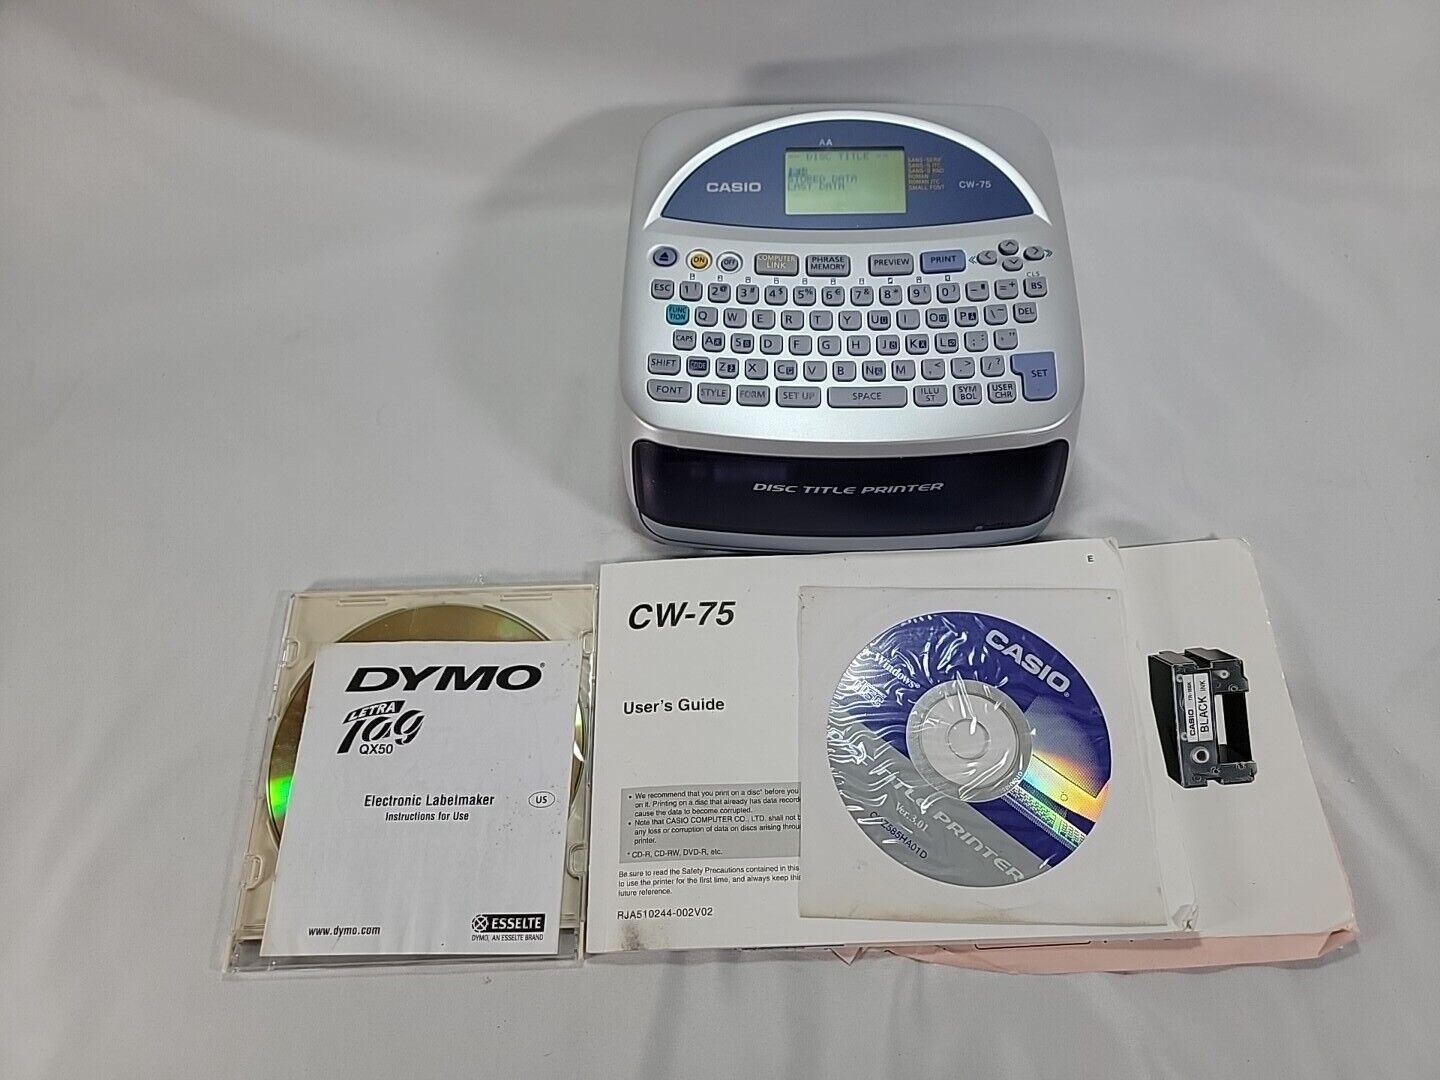 Casio Disc Title Printer CW-75 w/ Manual And CD -Qwerty Keyboard Tested /Working